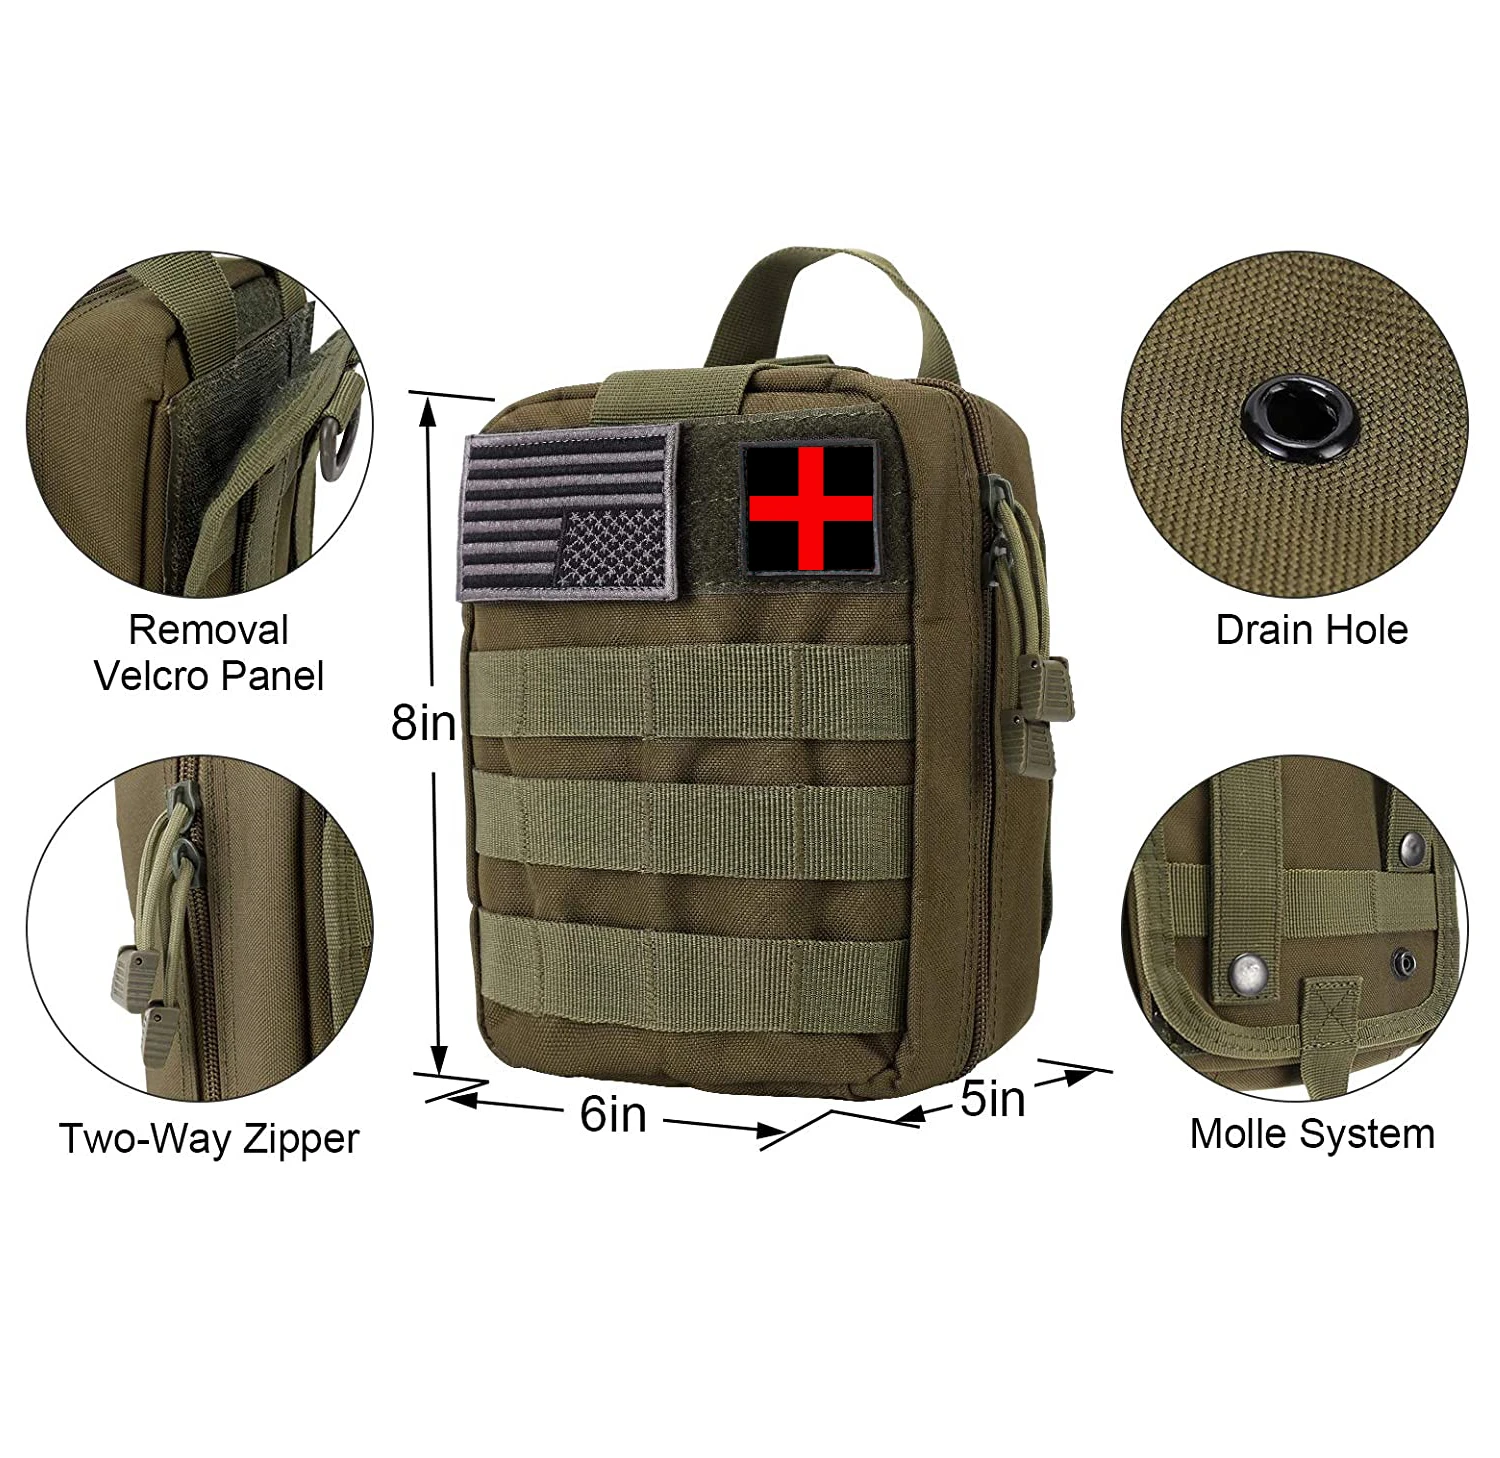 Professional Emergency Survival Gear Equipment Tools First Aid Supplies Molle SOS Tactical Hiking  Survival Kit.